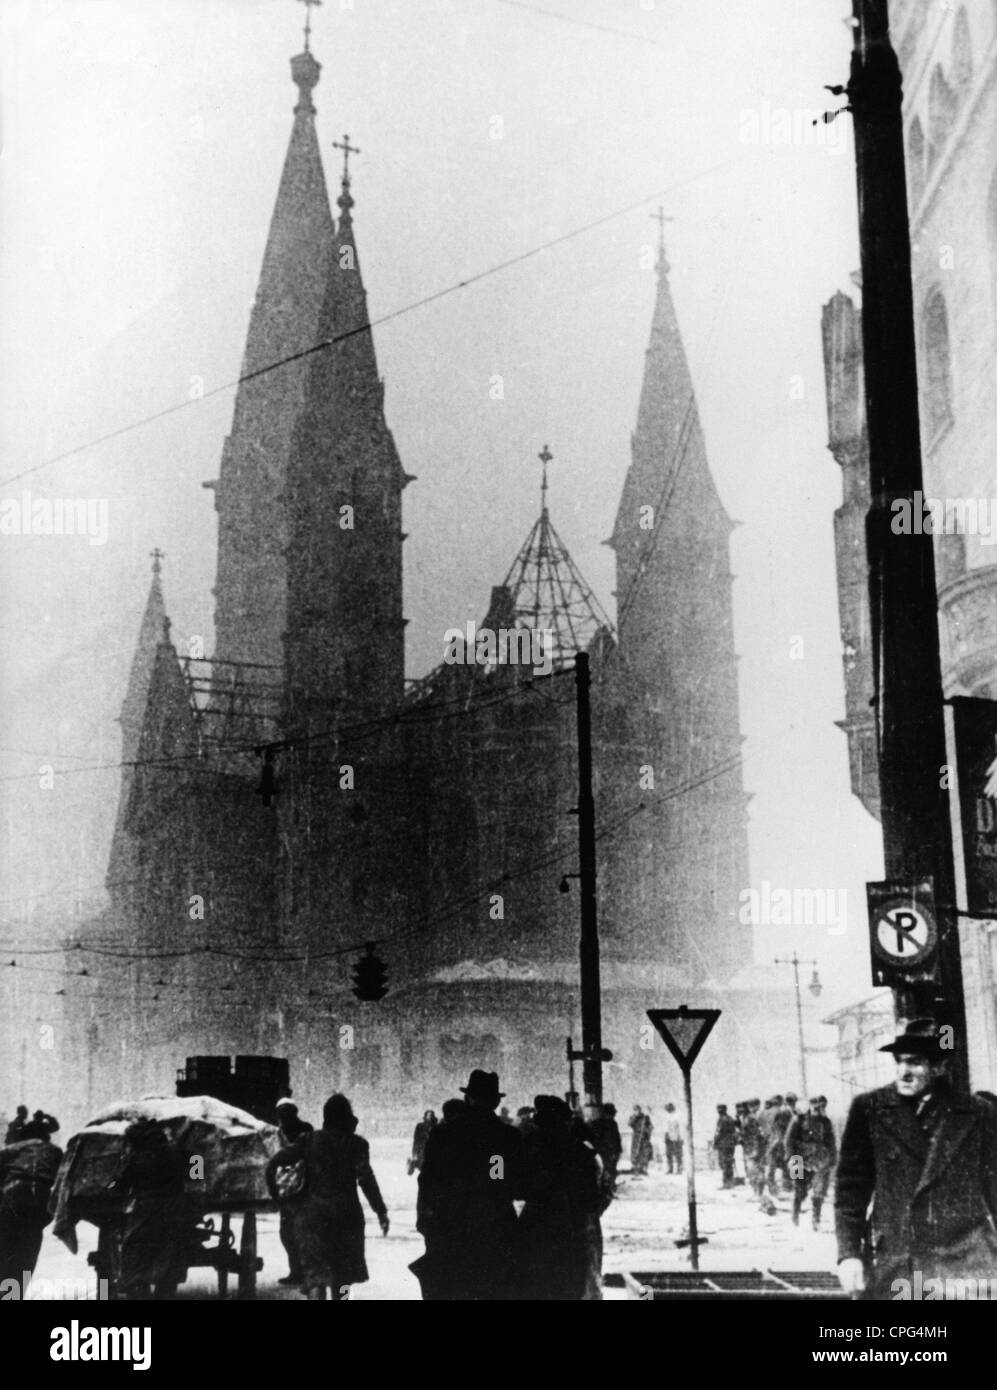 post war period, destroyed cities, Germany, Berlin, Kaiser Wilhelm Memorial Church, 1945, Additional-Rights-Clearences-Not Available Stock Photo